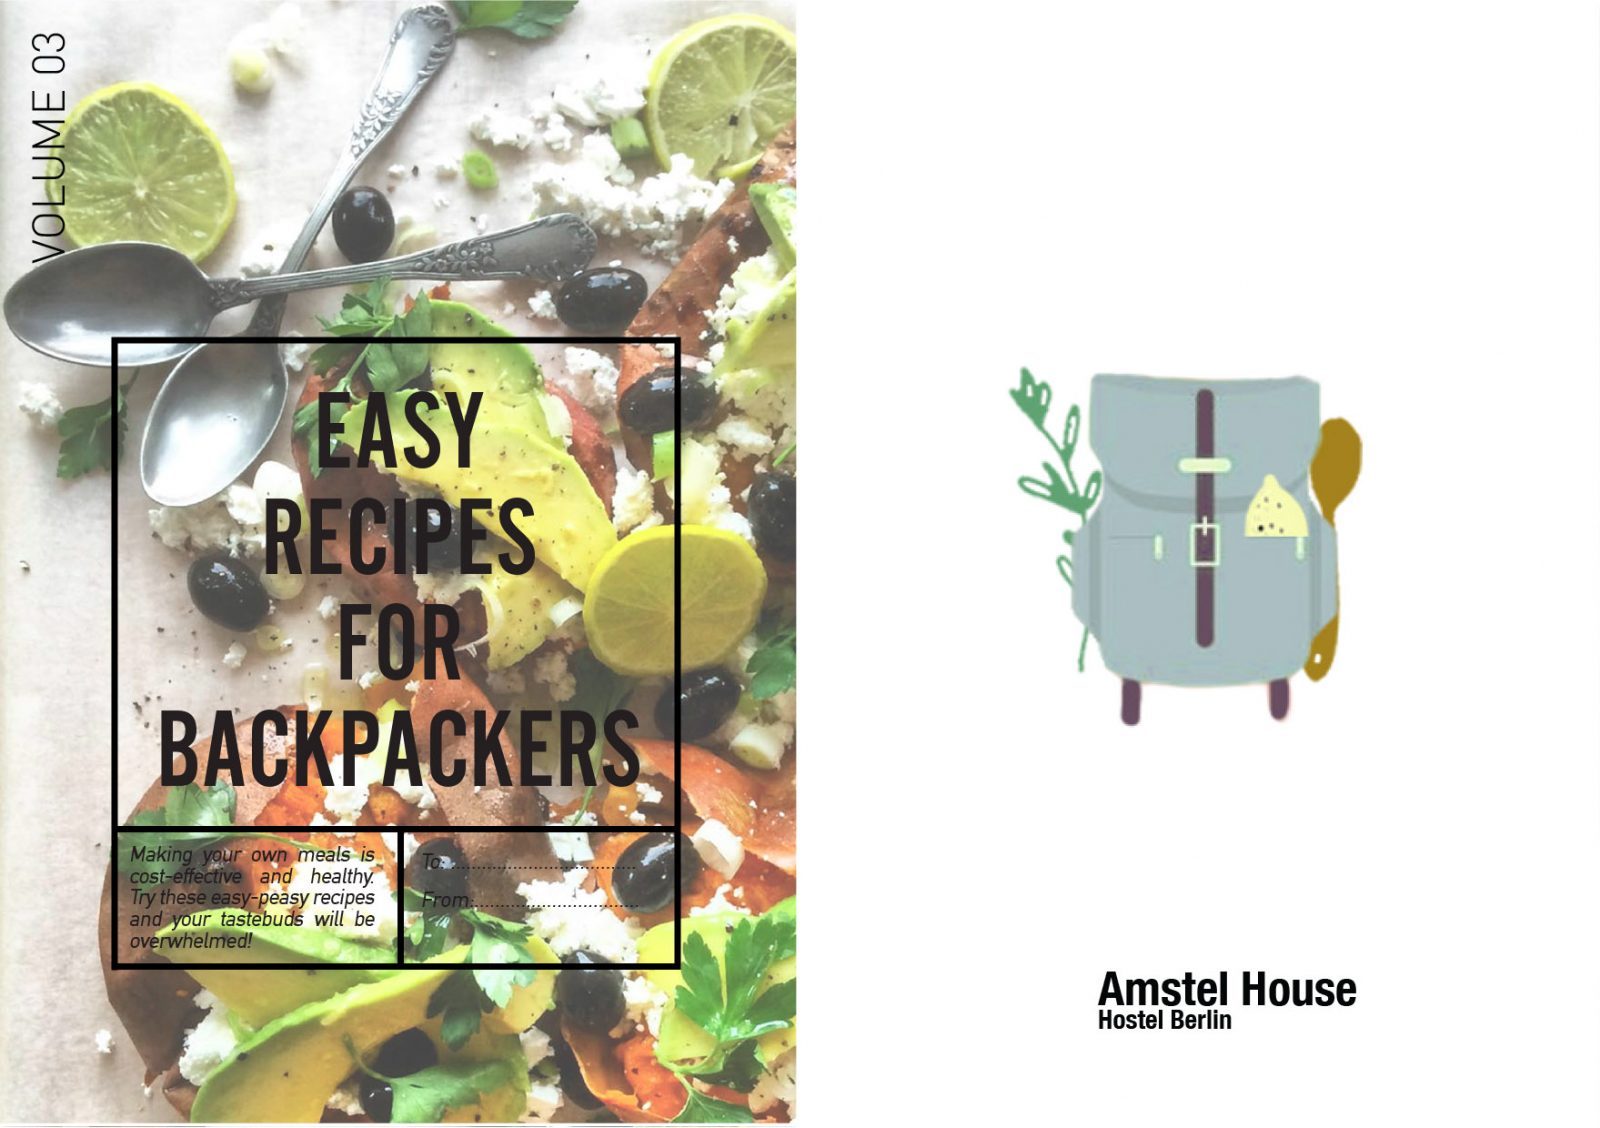 BACKPACKERS RECIPES